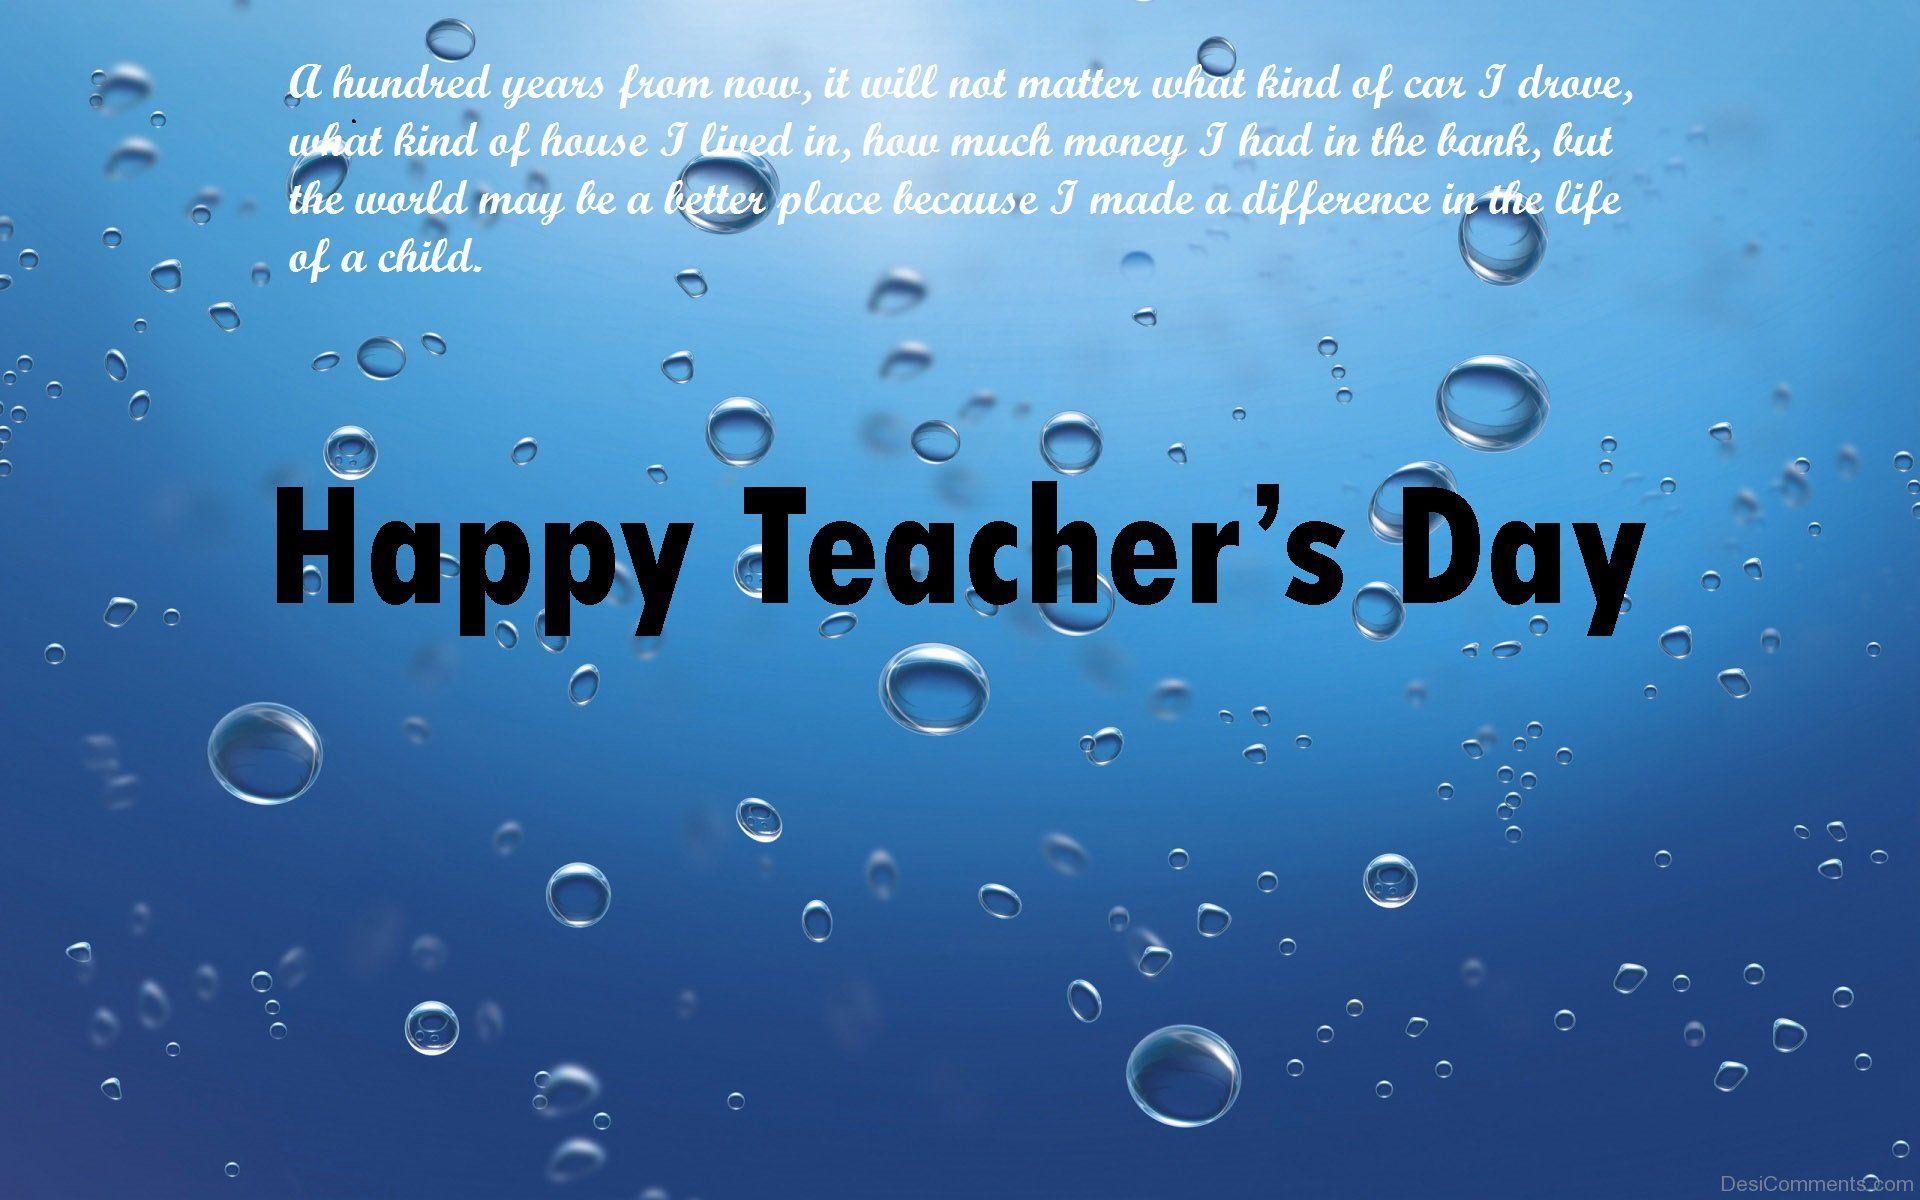 Teacher's Day Picture, Image, Graphics for Facebook, Whatsapp